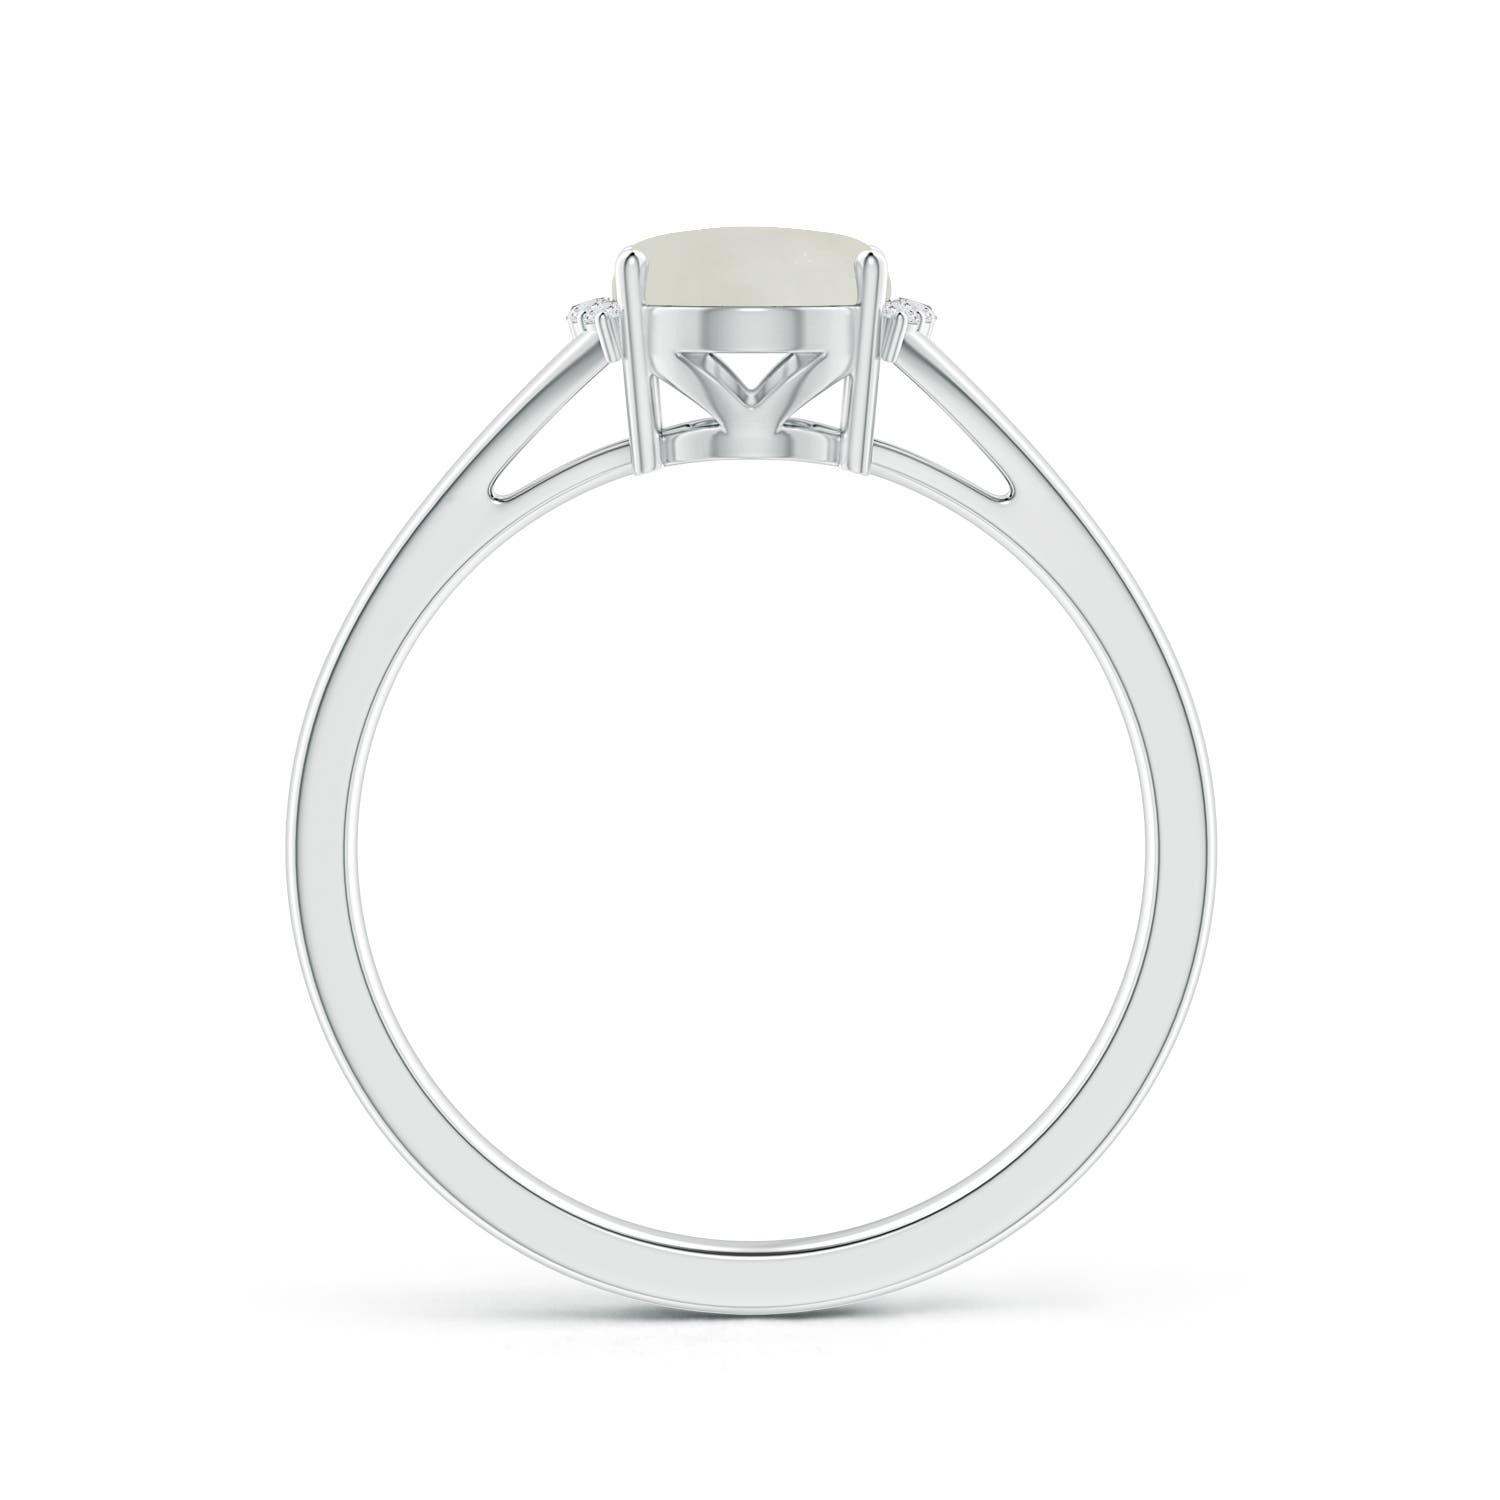 AAA - Moonstone / 1.15 CT / 14 KT White Gold